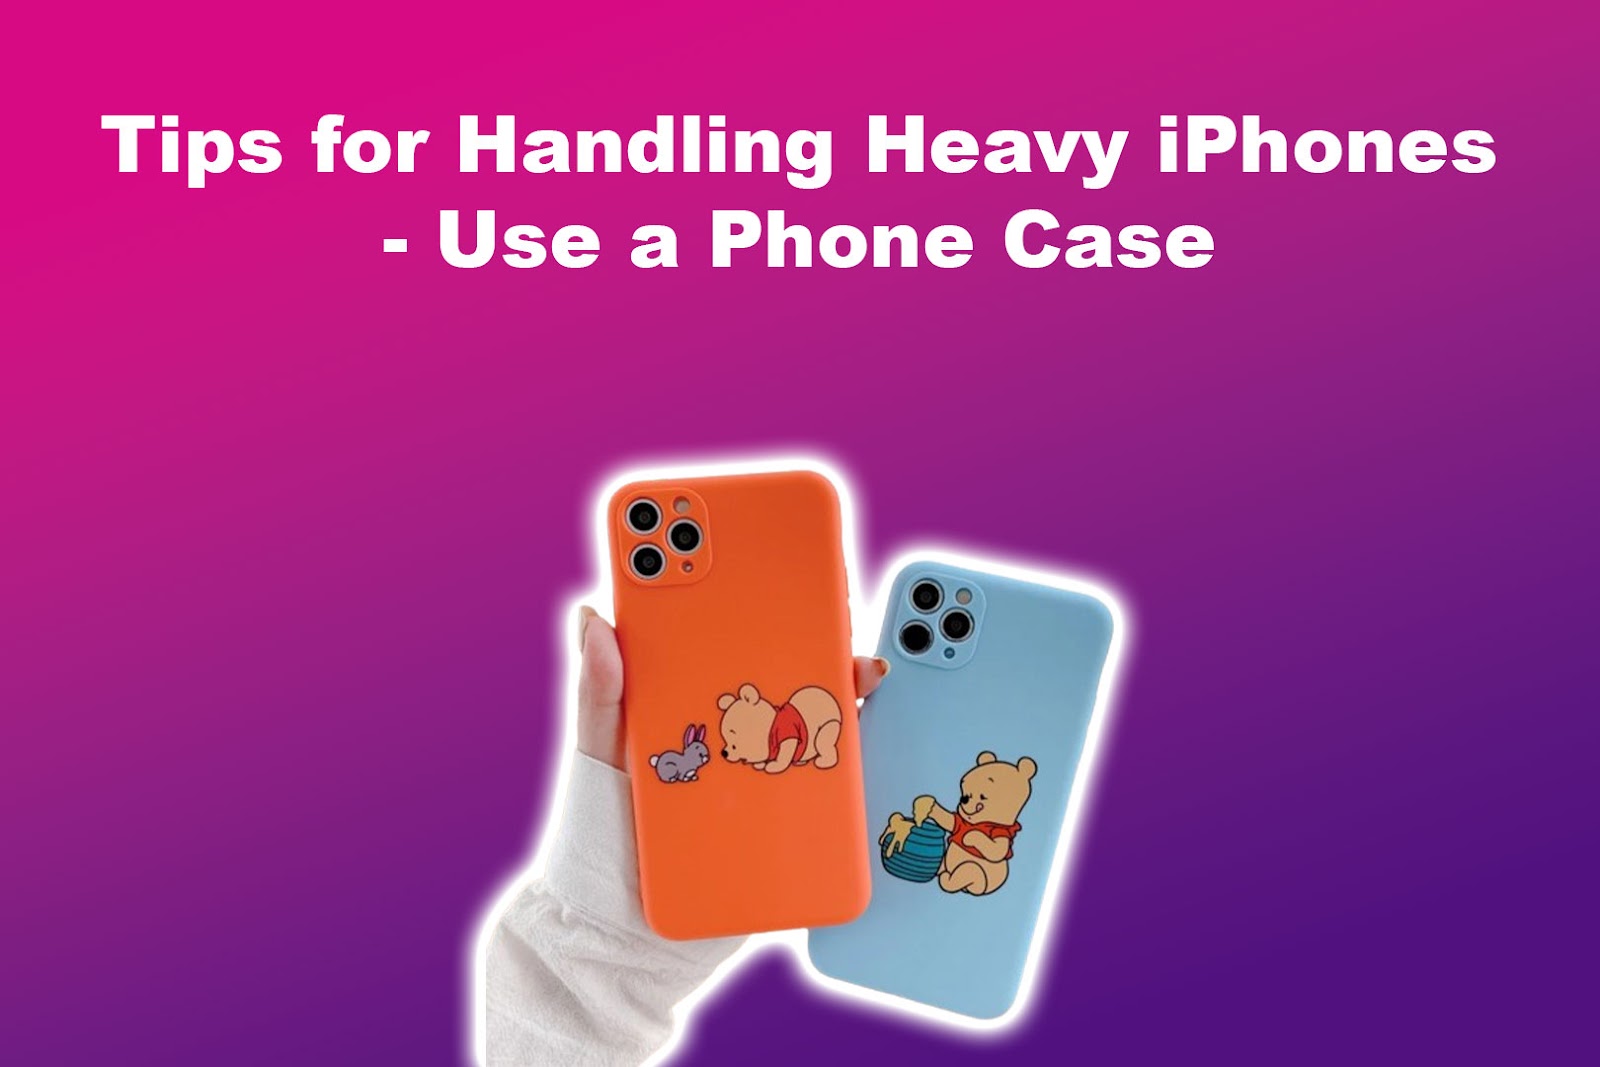 Tips for Handling Heavy iPhones - Use a Phone Case